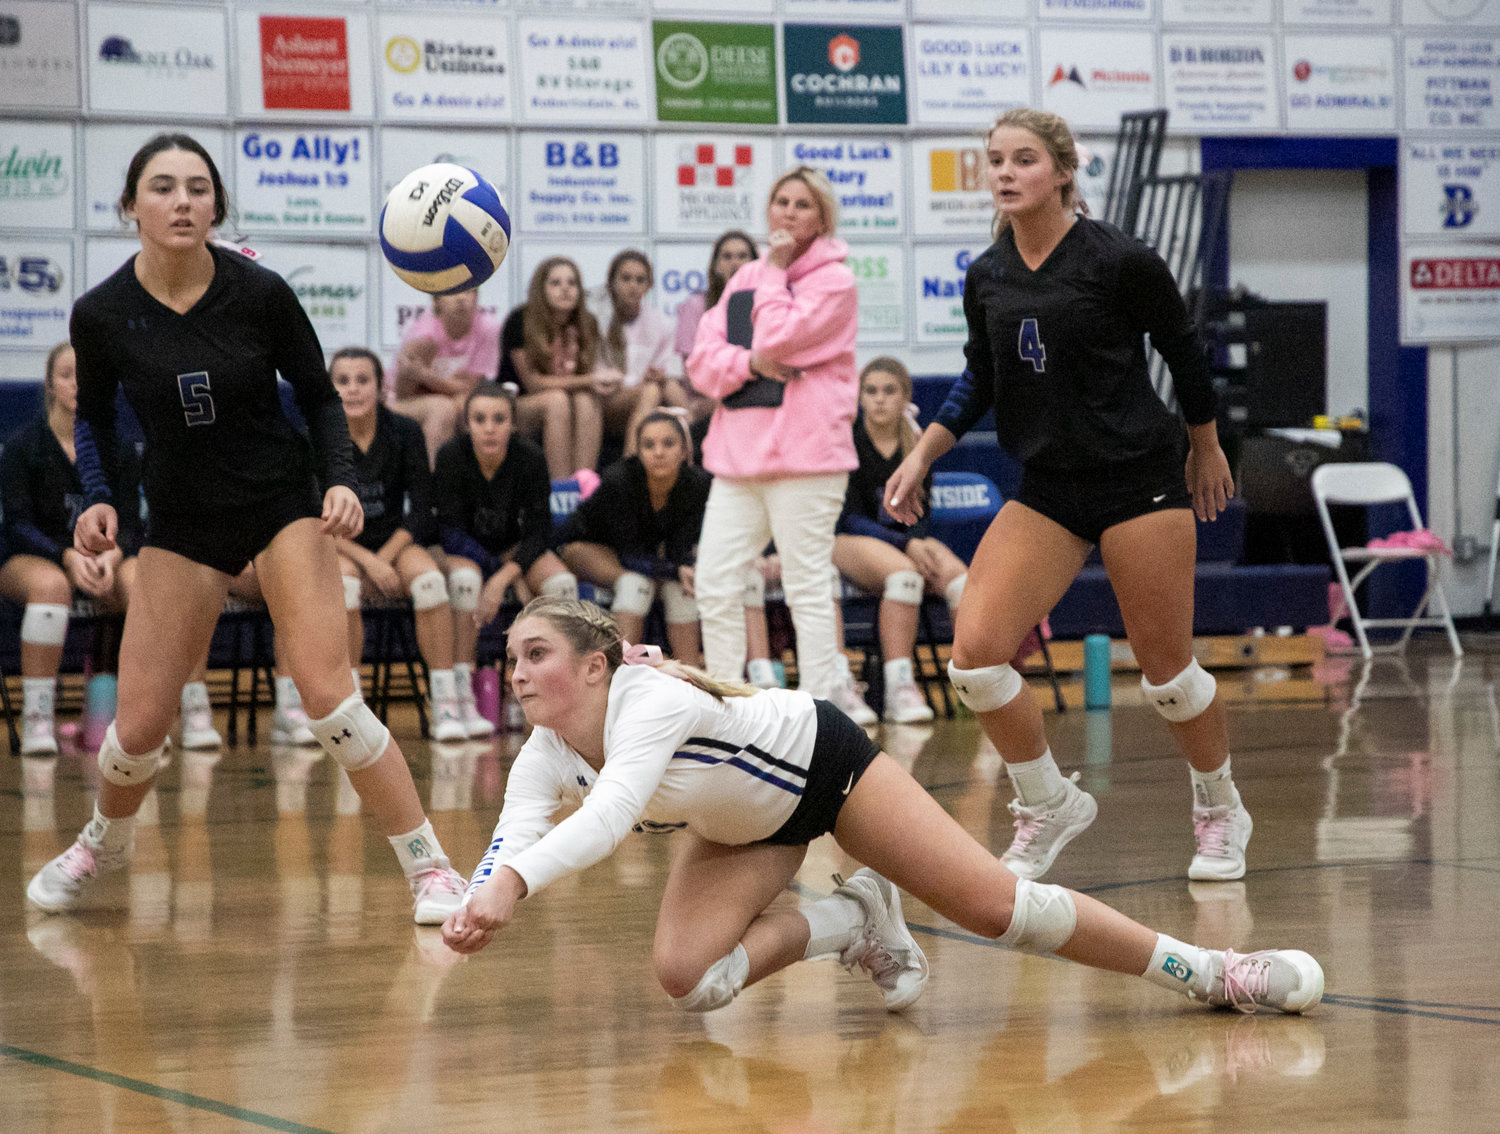 Admiral freshman Mary Katherine Whitehurst extends for a dig during Bayside Academy’s home match against Baldwin County in the Class 6A Area 2 Tournament Oct. 13. According to MaxPreps stats, Whitehurst racked up the most digs in the nation (654) for athletes in the Class of 2026.